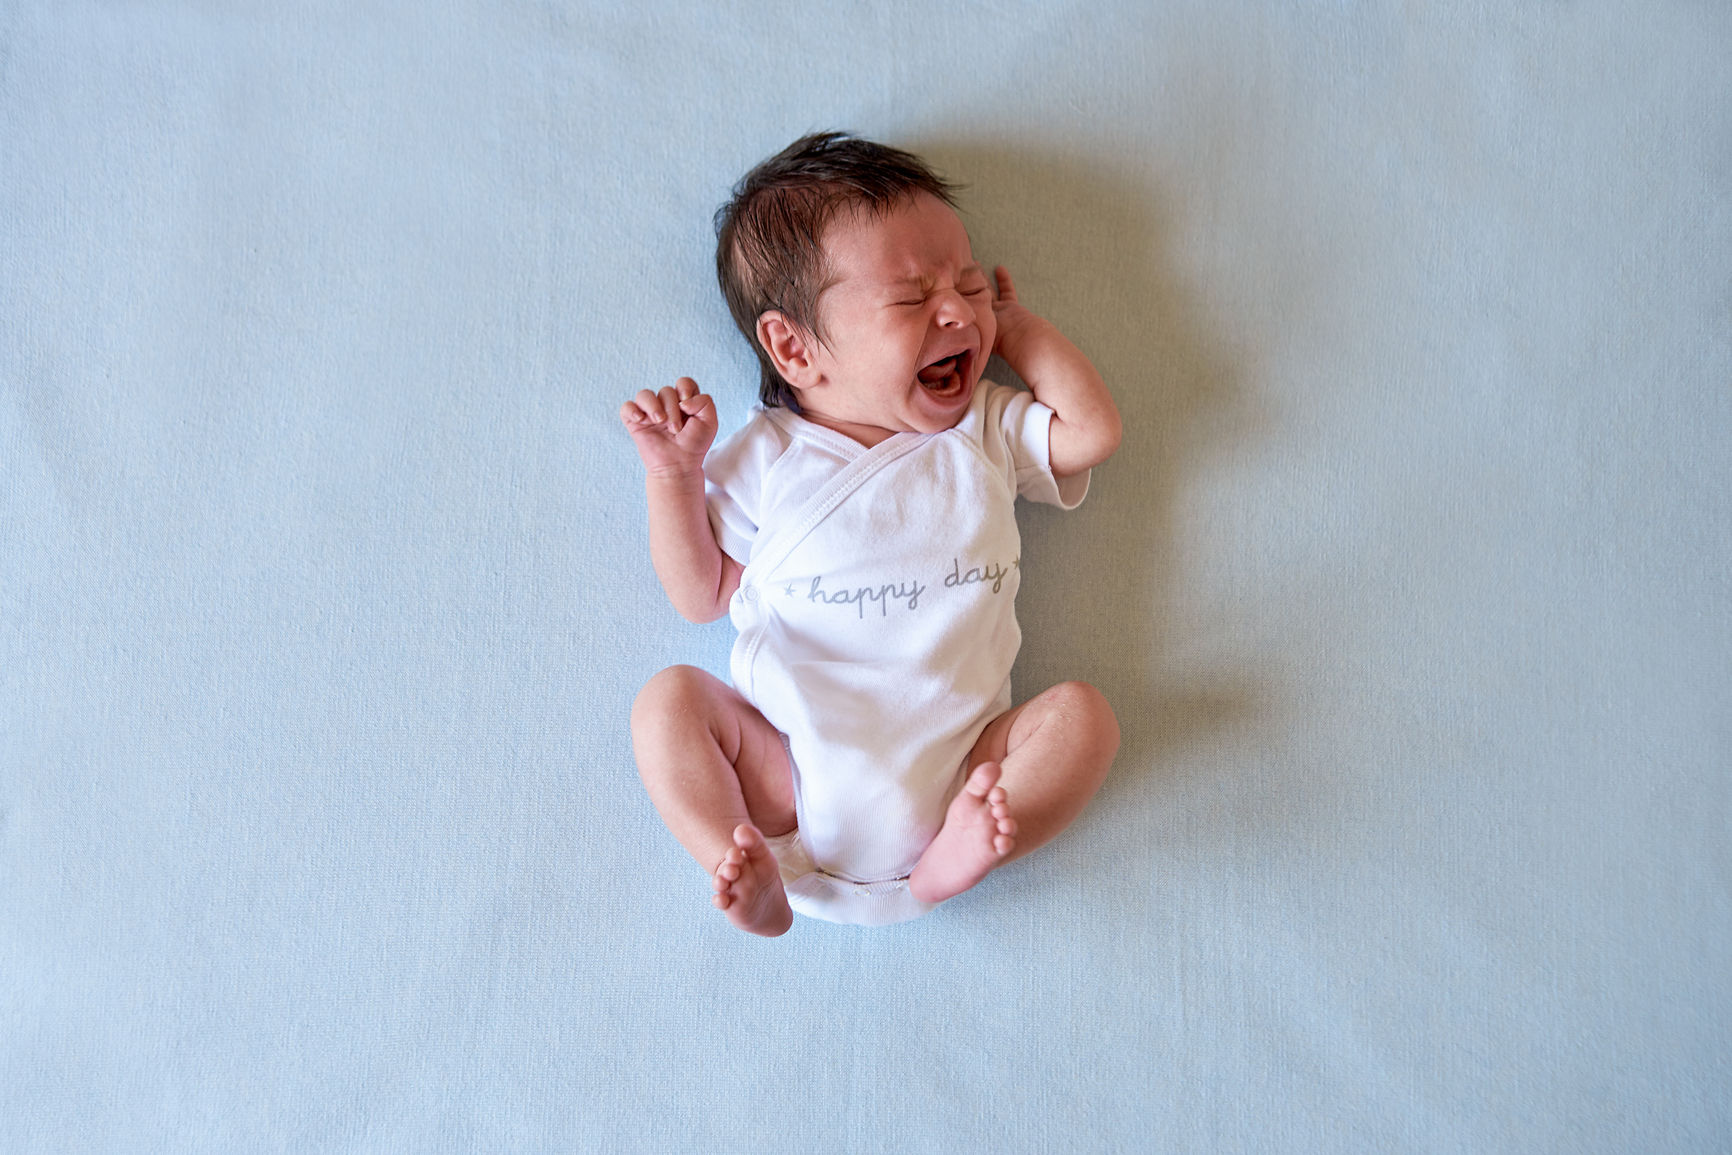 Newborn crying in body with happy day text on white bedcloth.From above